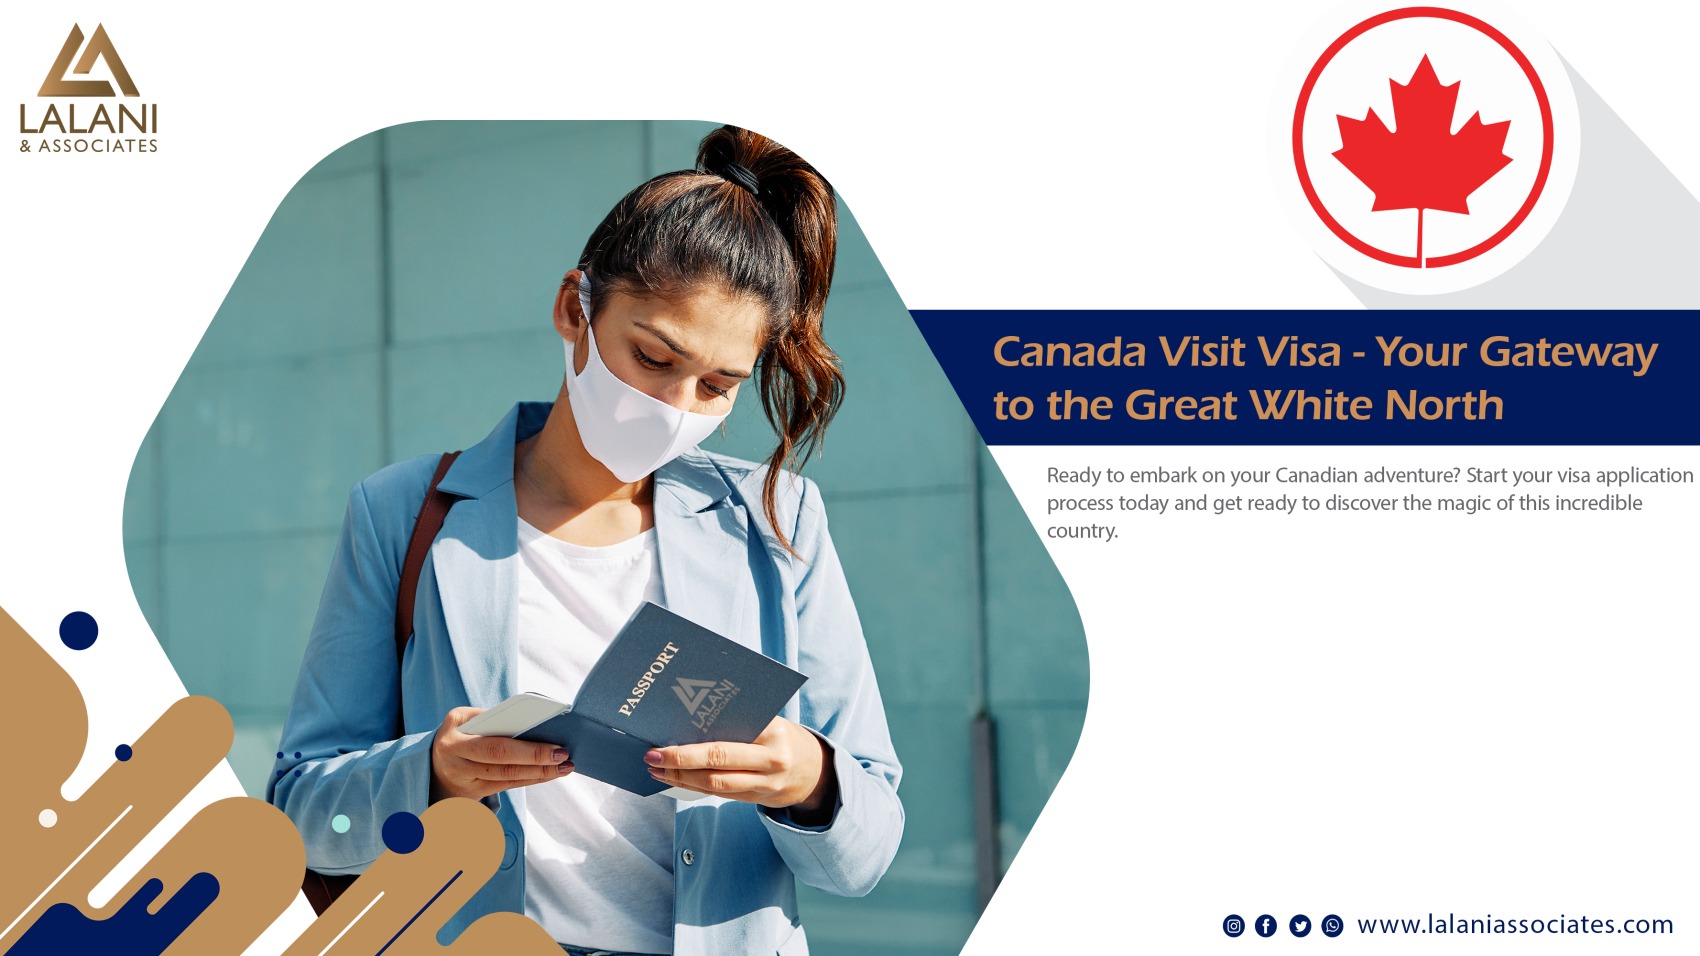 Canada Visit Visa – Your Gateway to the Great White North